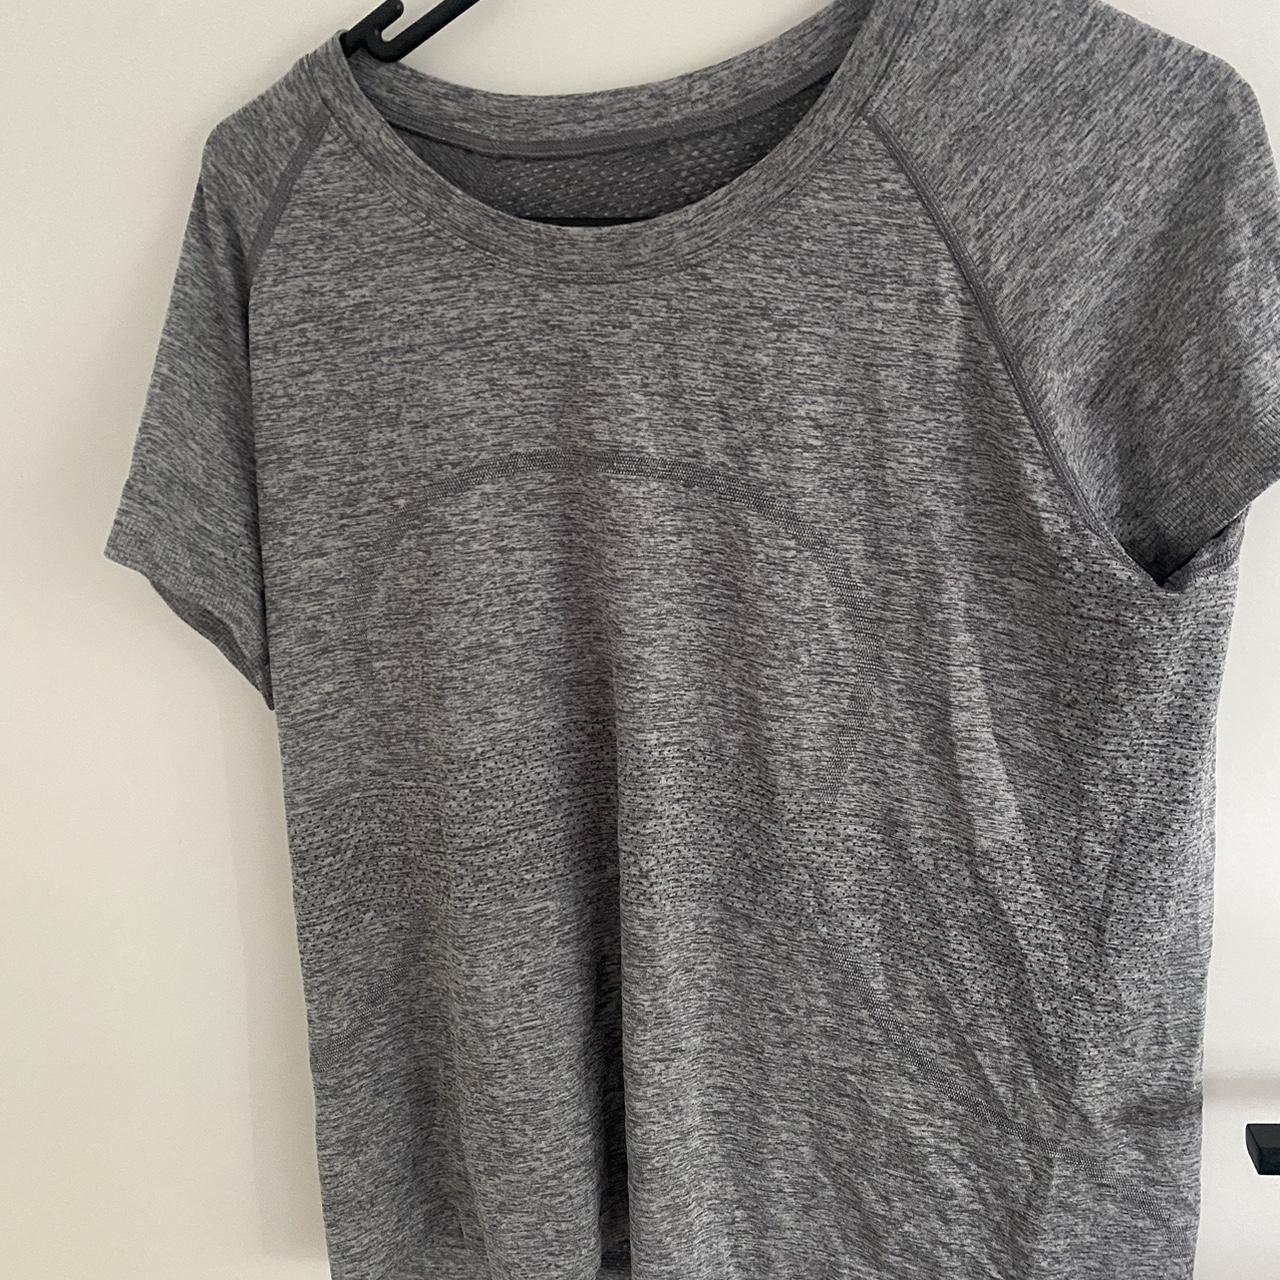 Lululemon salt and pepper active top 🤍 Size small to... - Depop